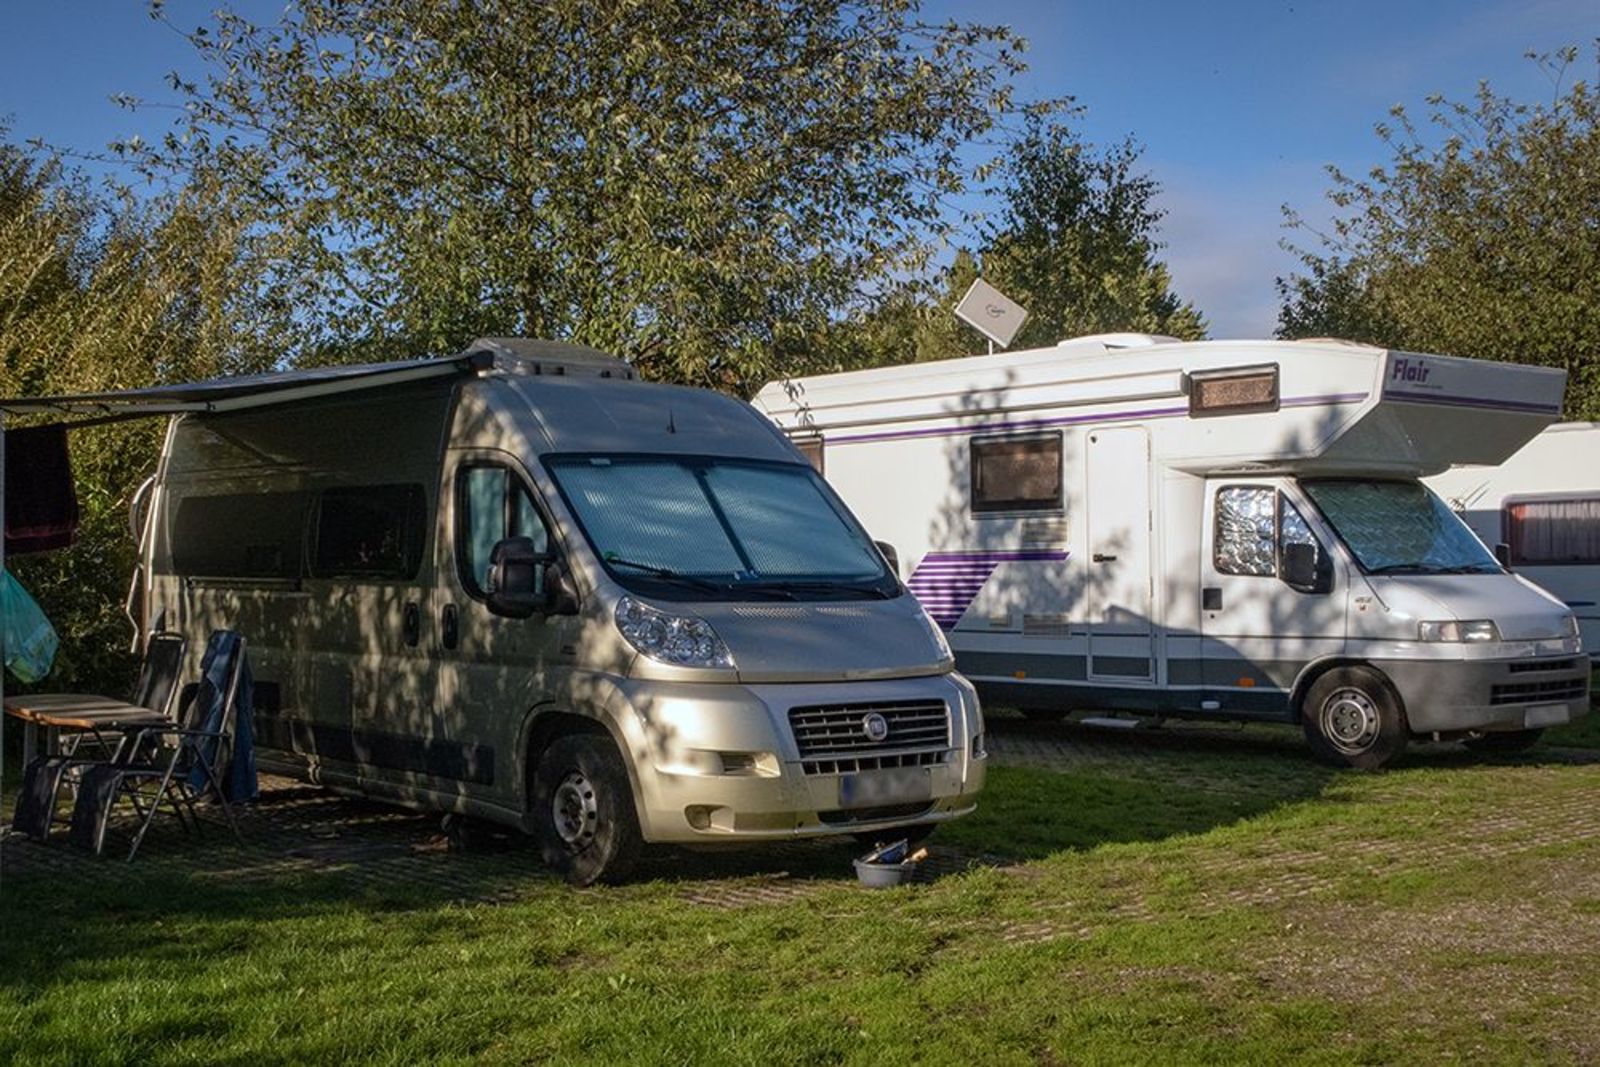 Two motorhome/camper pitches side by side on a corner